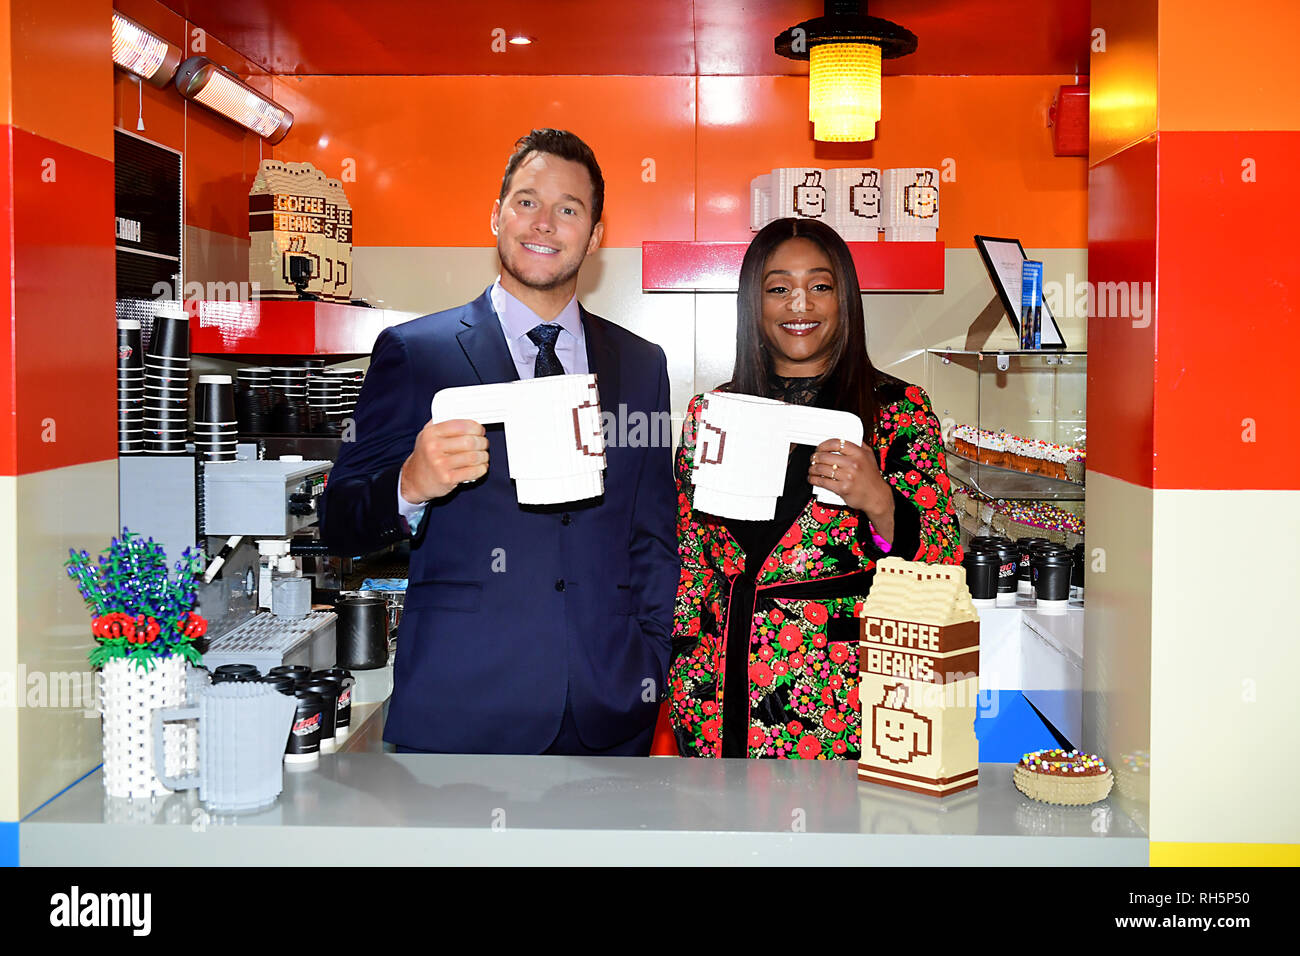 Stars of The Lego Movie 2, Chris Pratt and Tiffany Haddish, serve the first  customers coffee as they officially open the Lego pop-up cafe 'The Coffee  Chain' on the South Bank, London